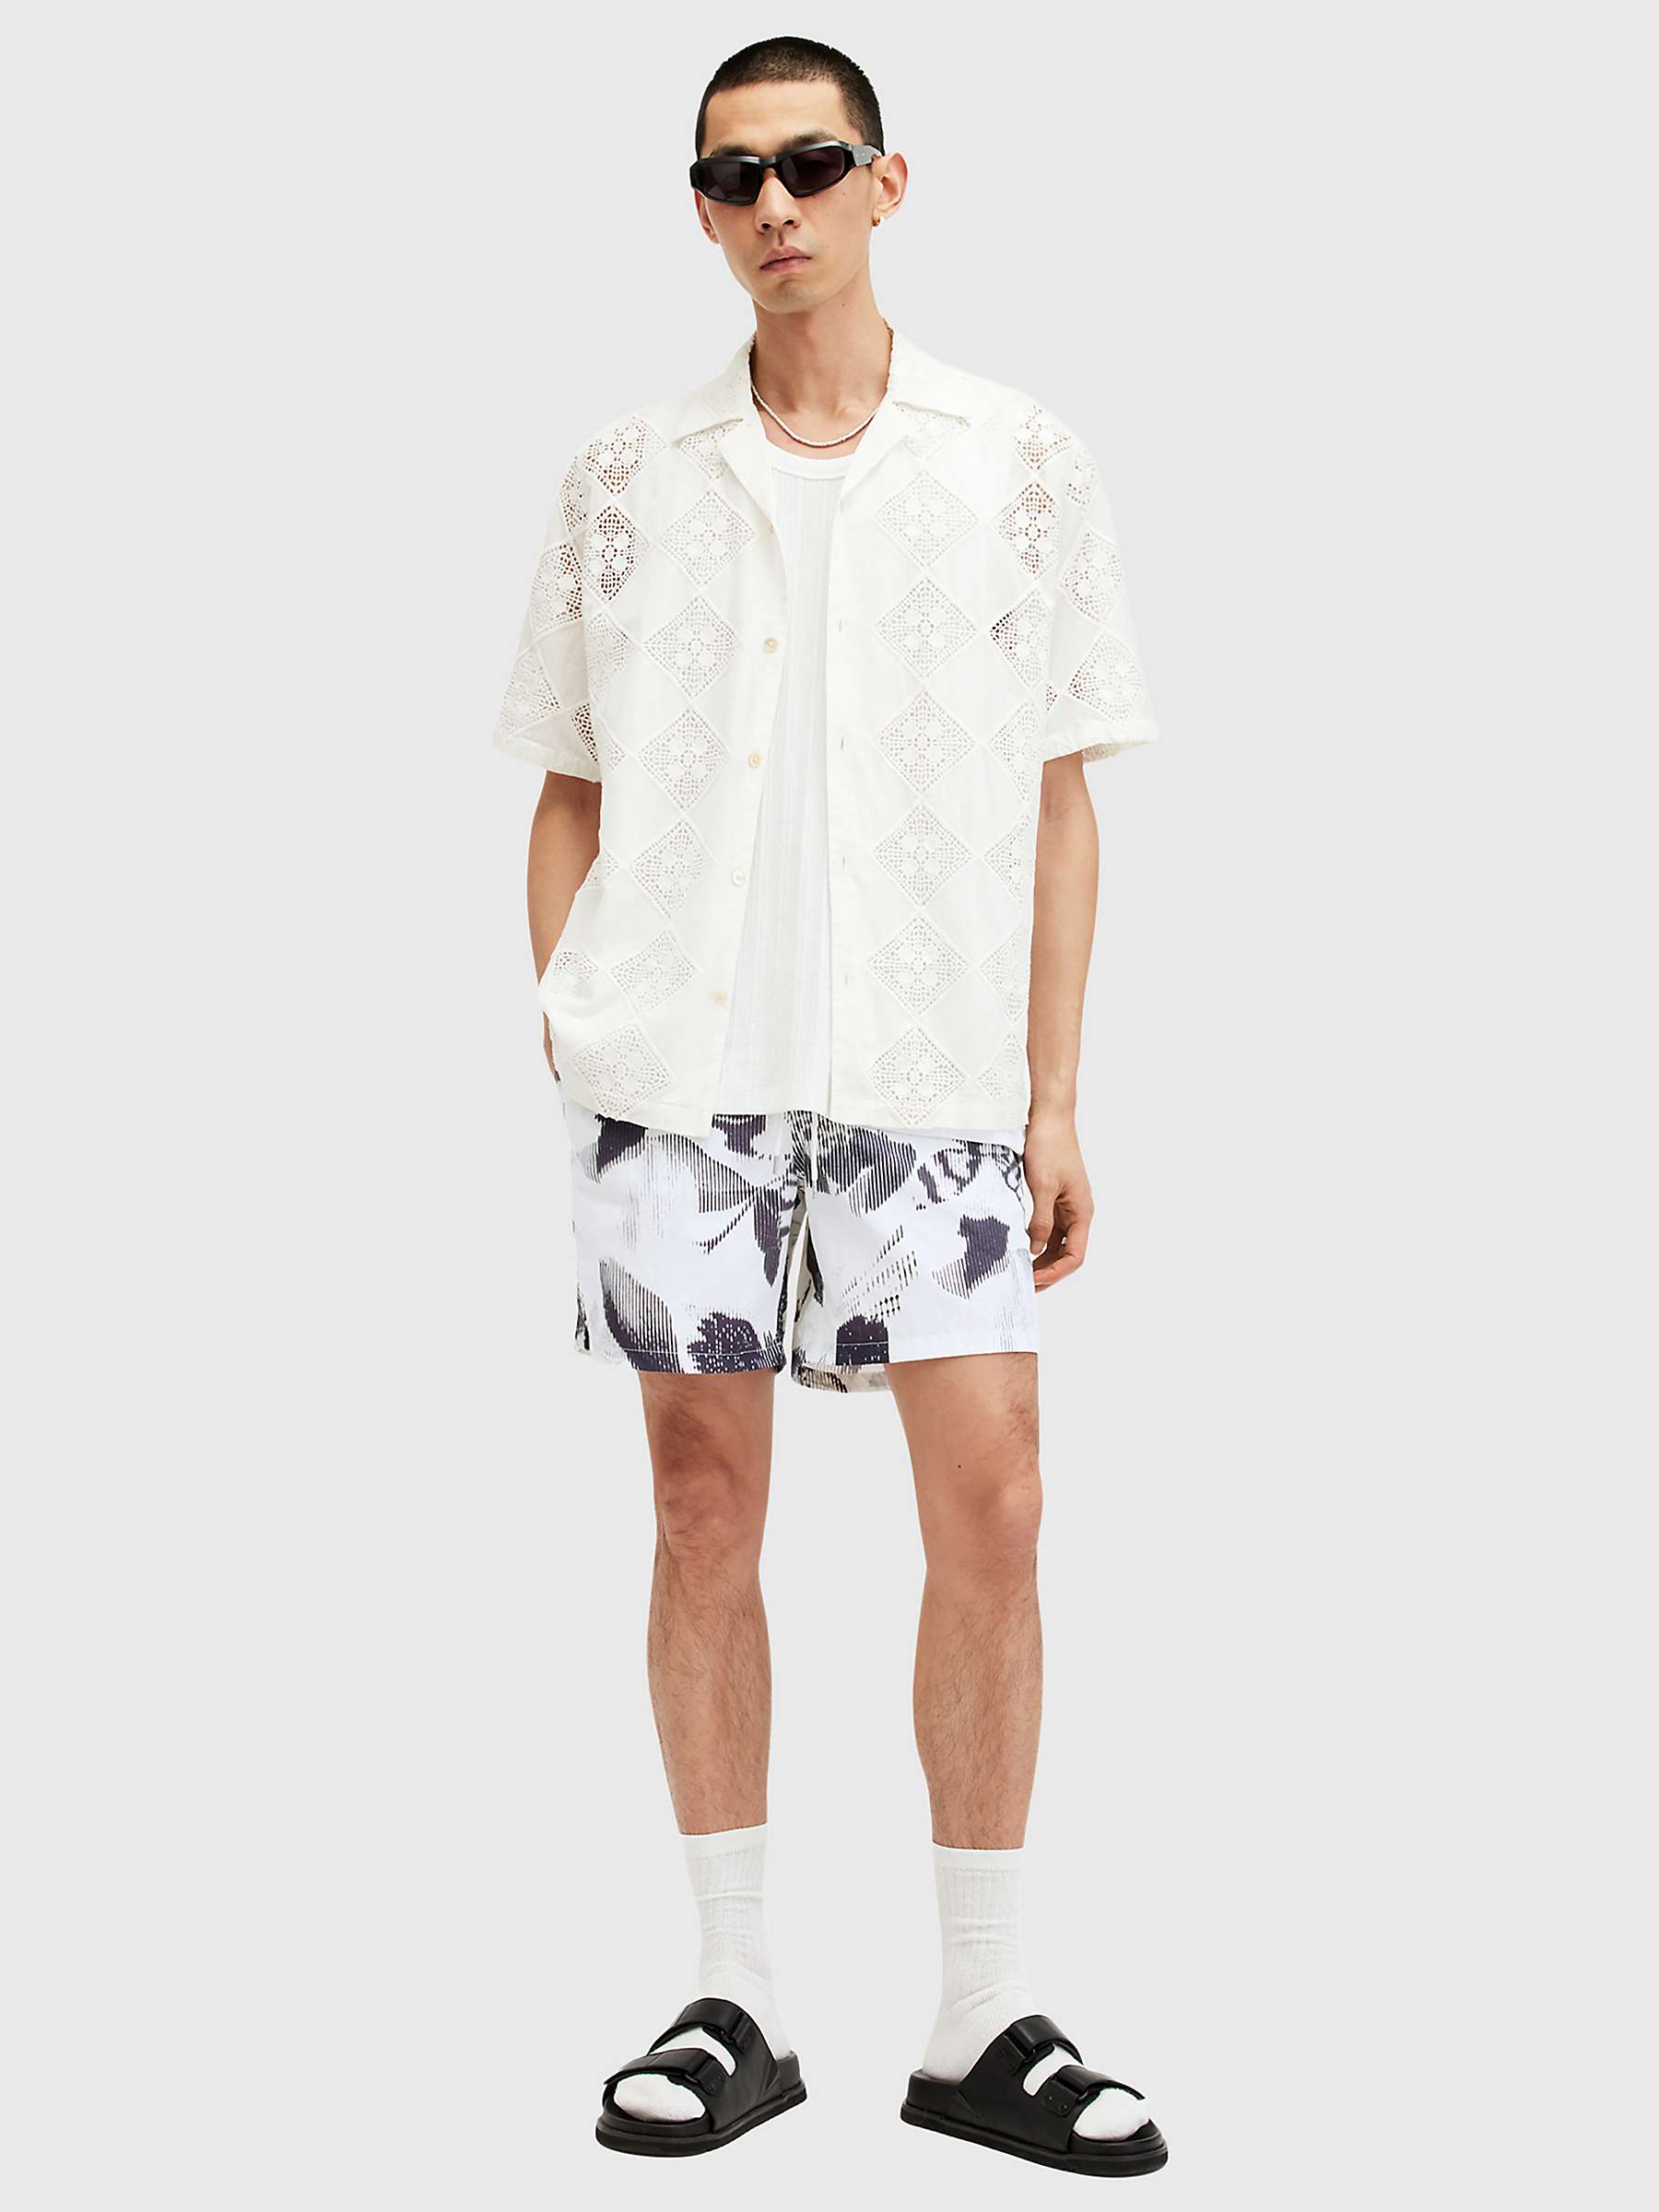 Buy AllSaints Frequency Swim Shorts, White/Multi Online at johnlewis.com